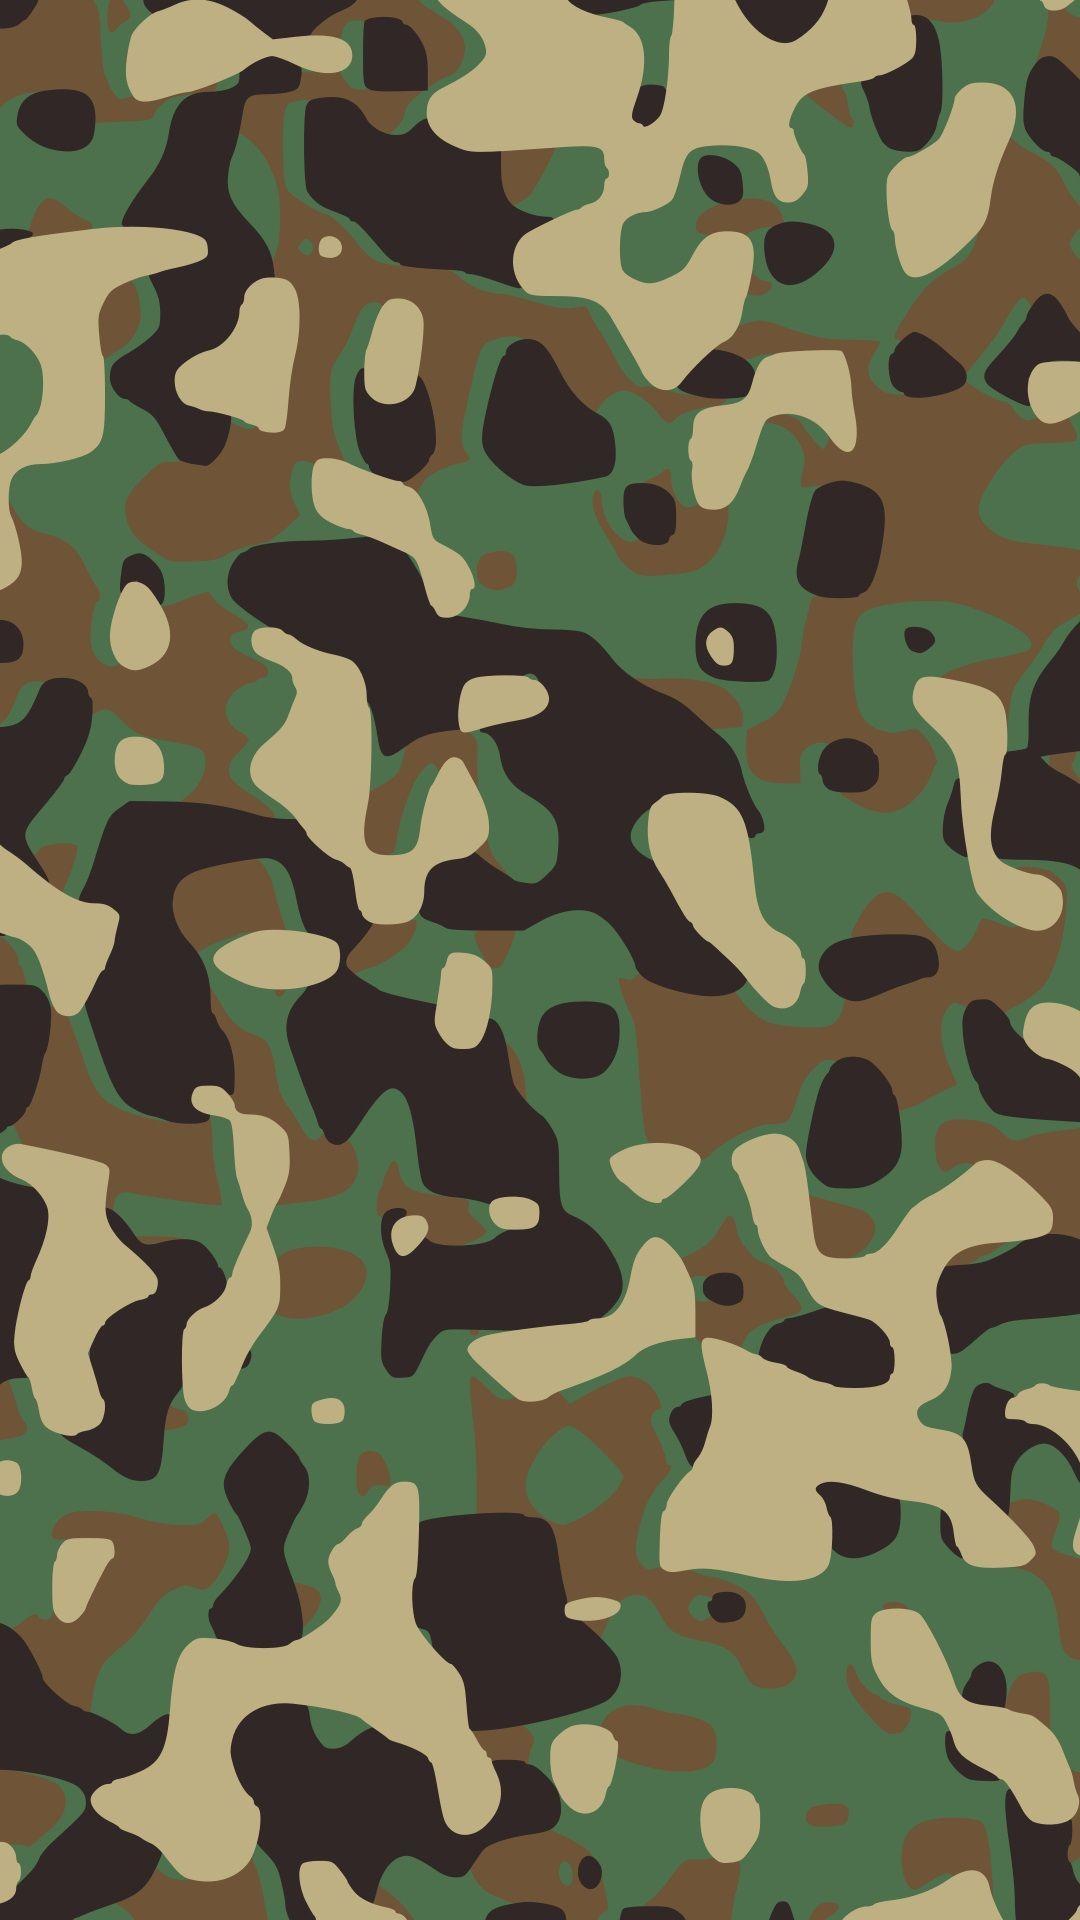 Camouflage Wallpaper Apps on Google Play. Camouflage wallpaper, Camo wallpaper, Camoflauge wallpaper